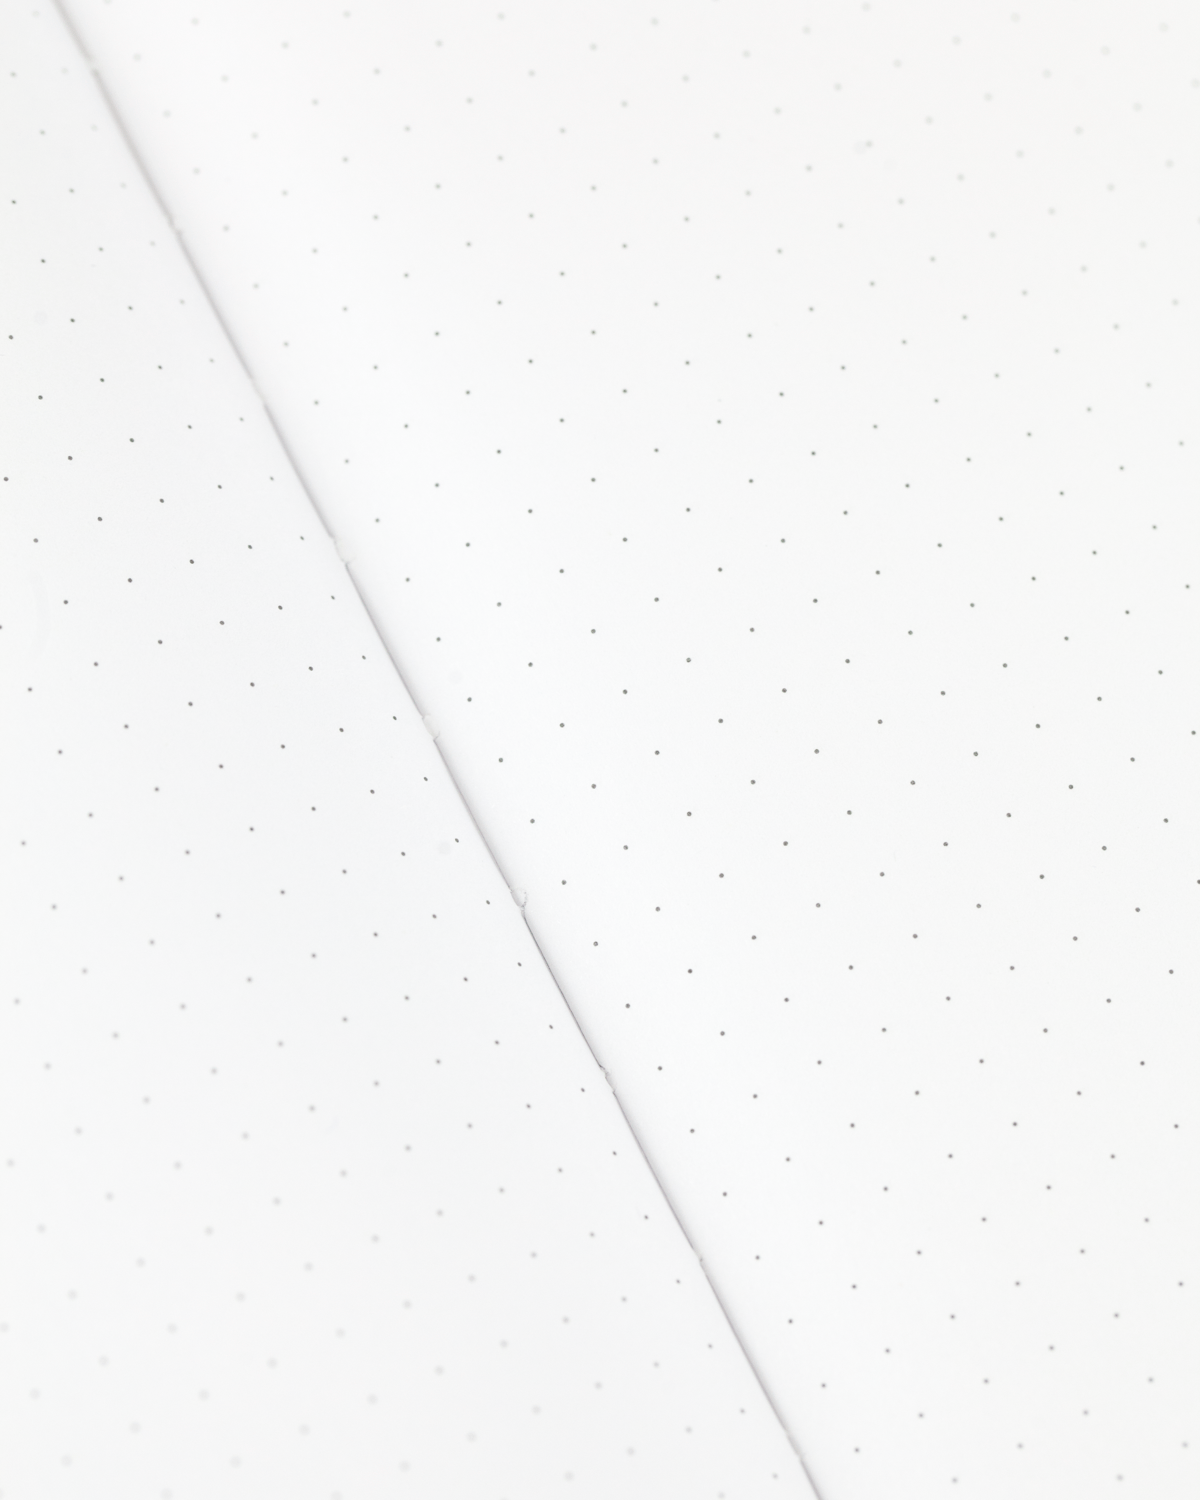 Insects Hardcover - Dot Grid